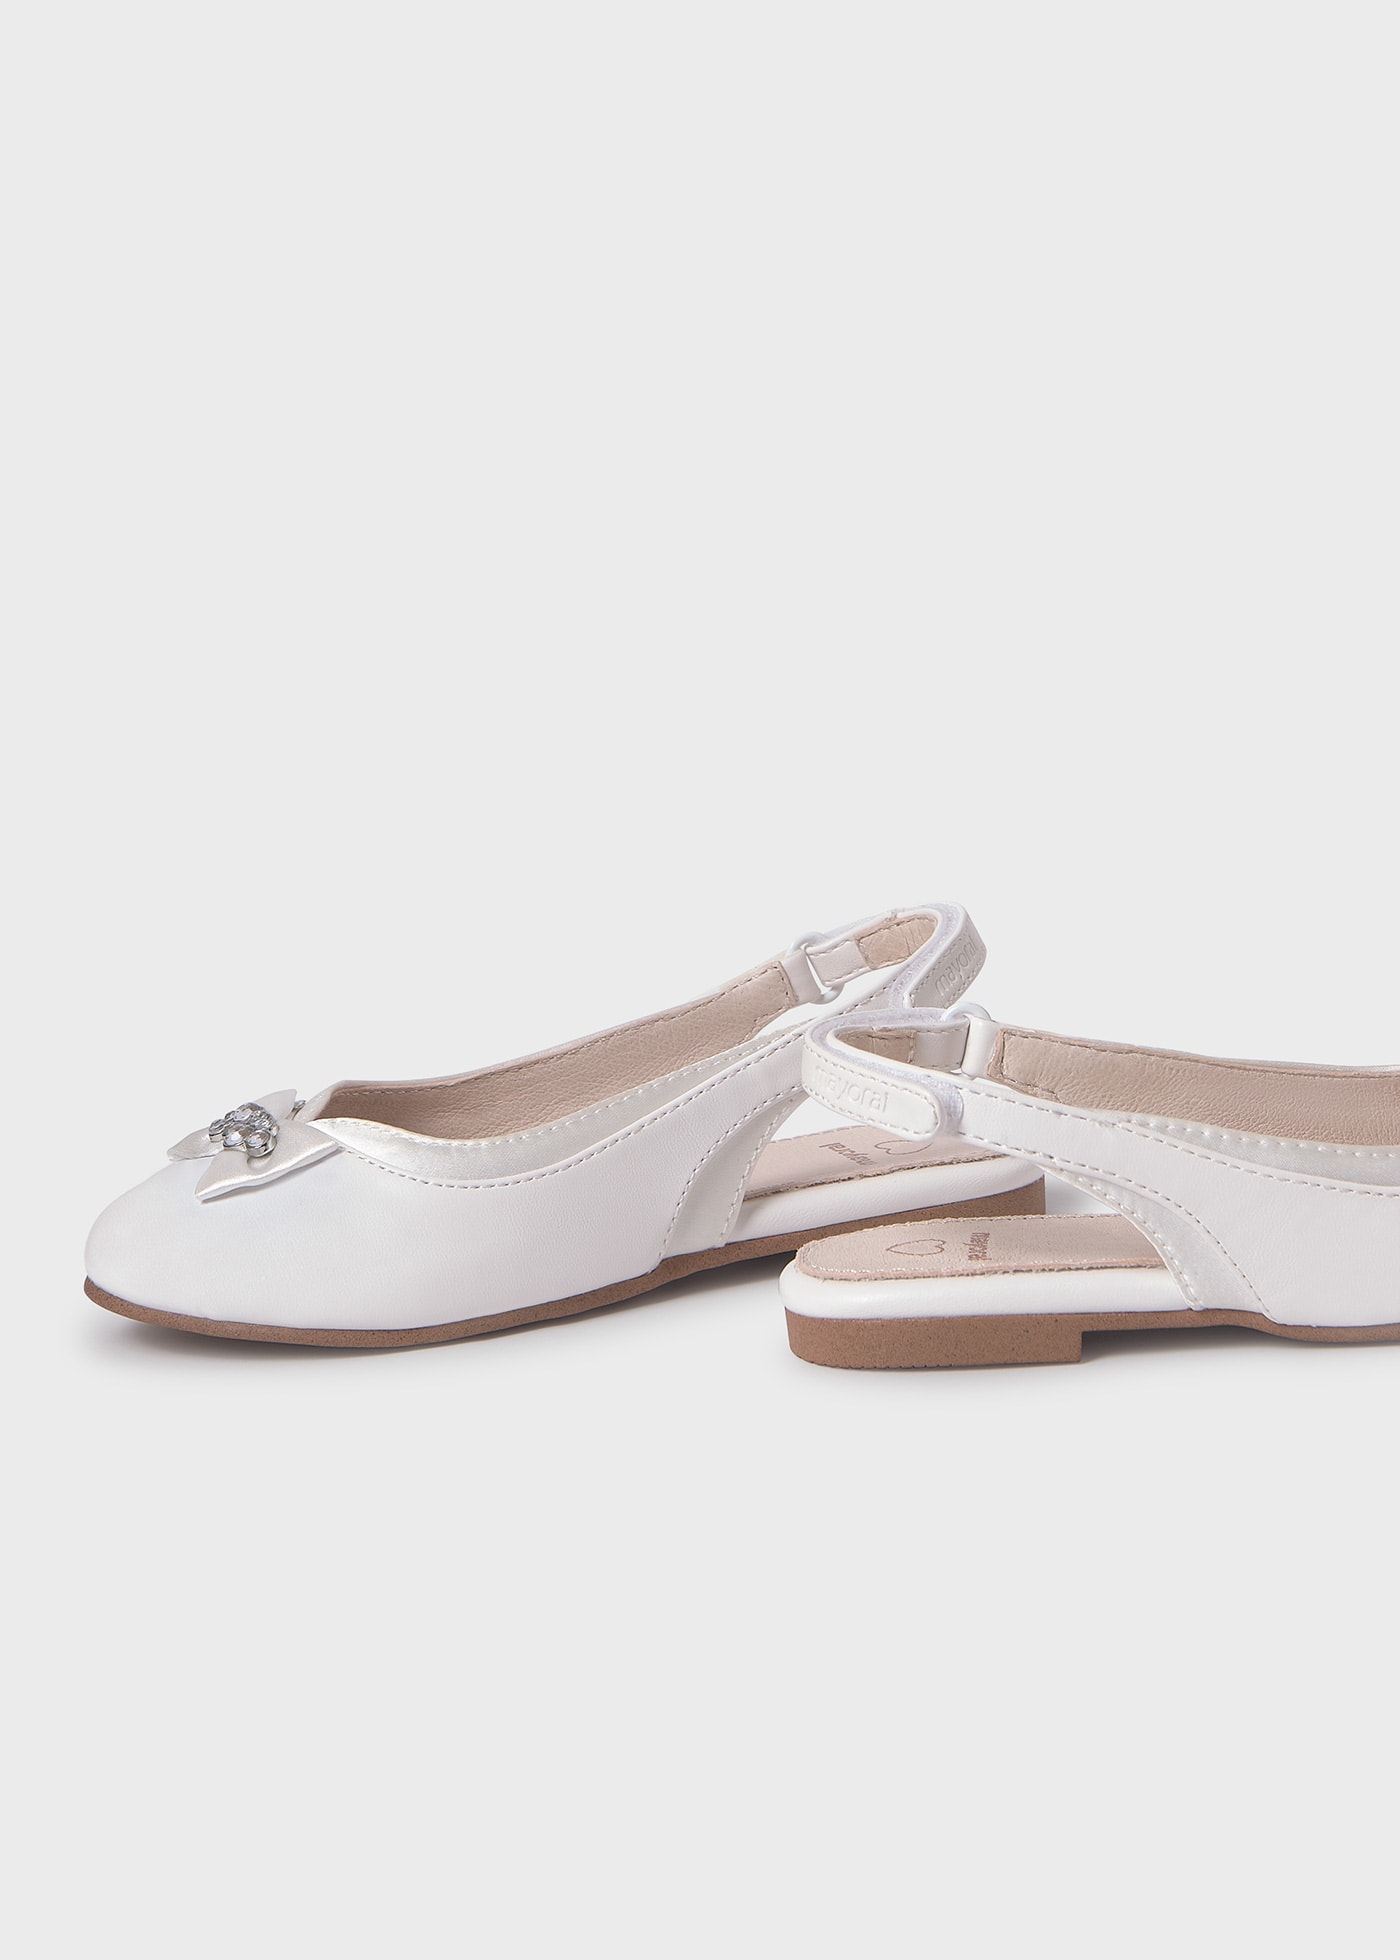 Girl Ballerina Flats with Bow Sustainable Leather